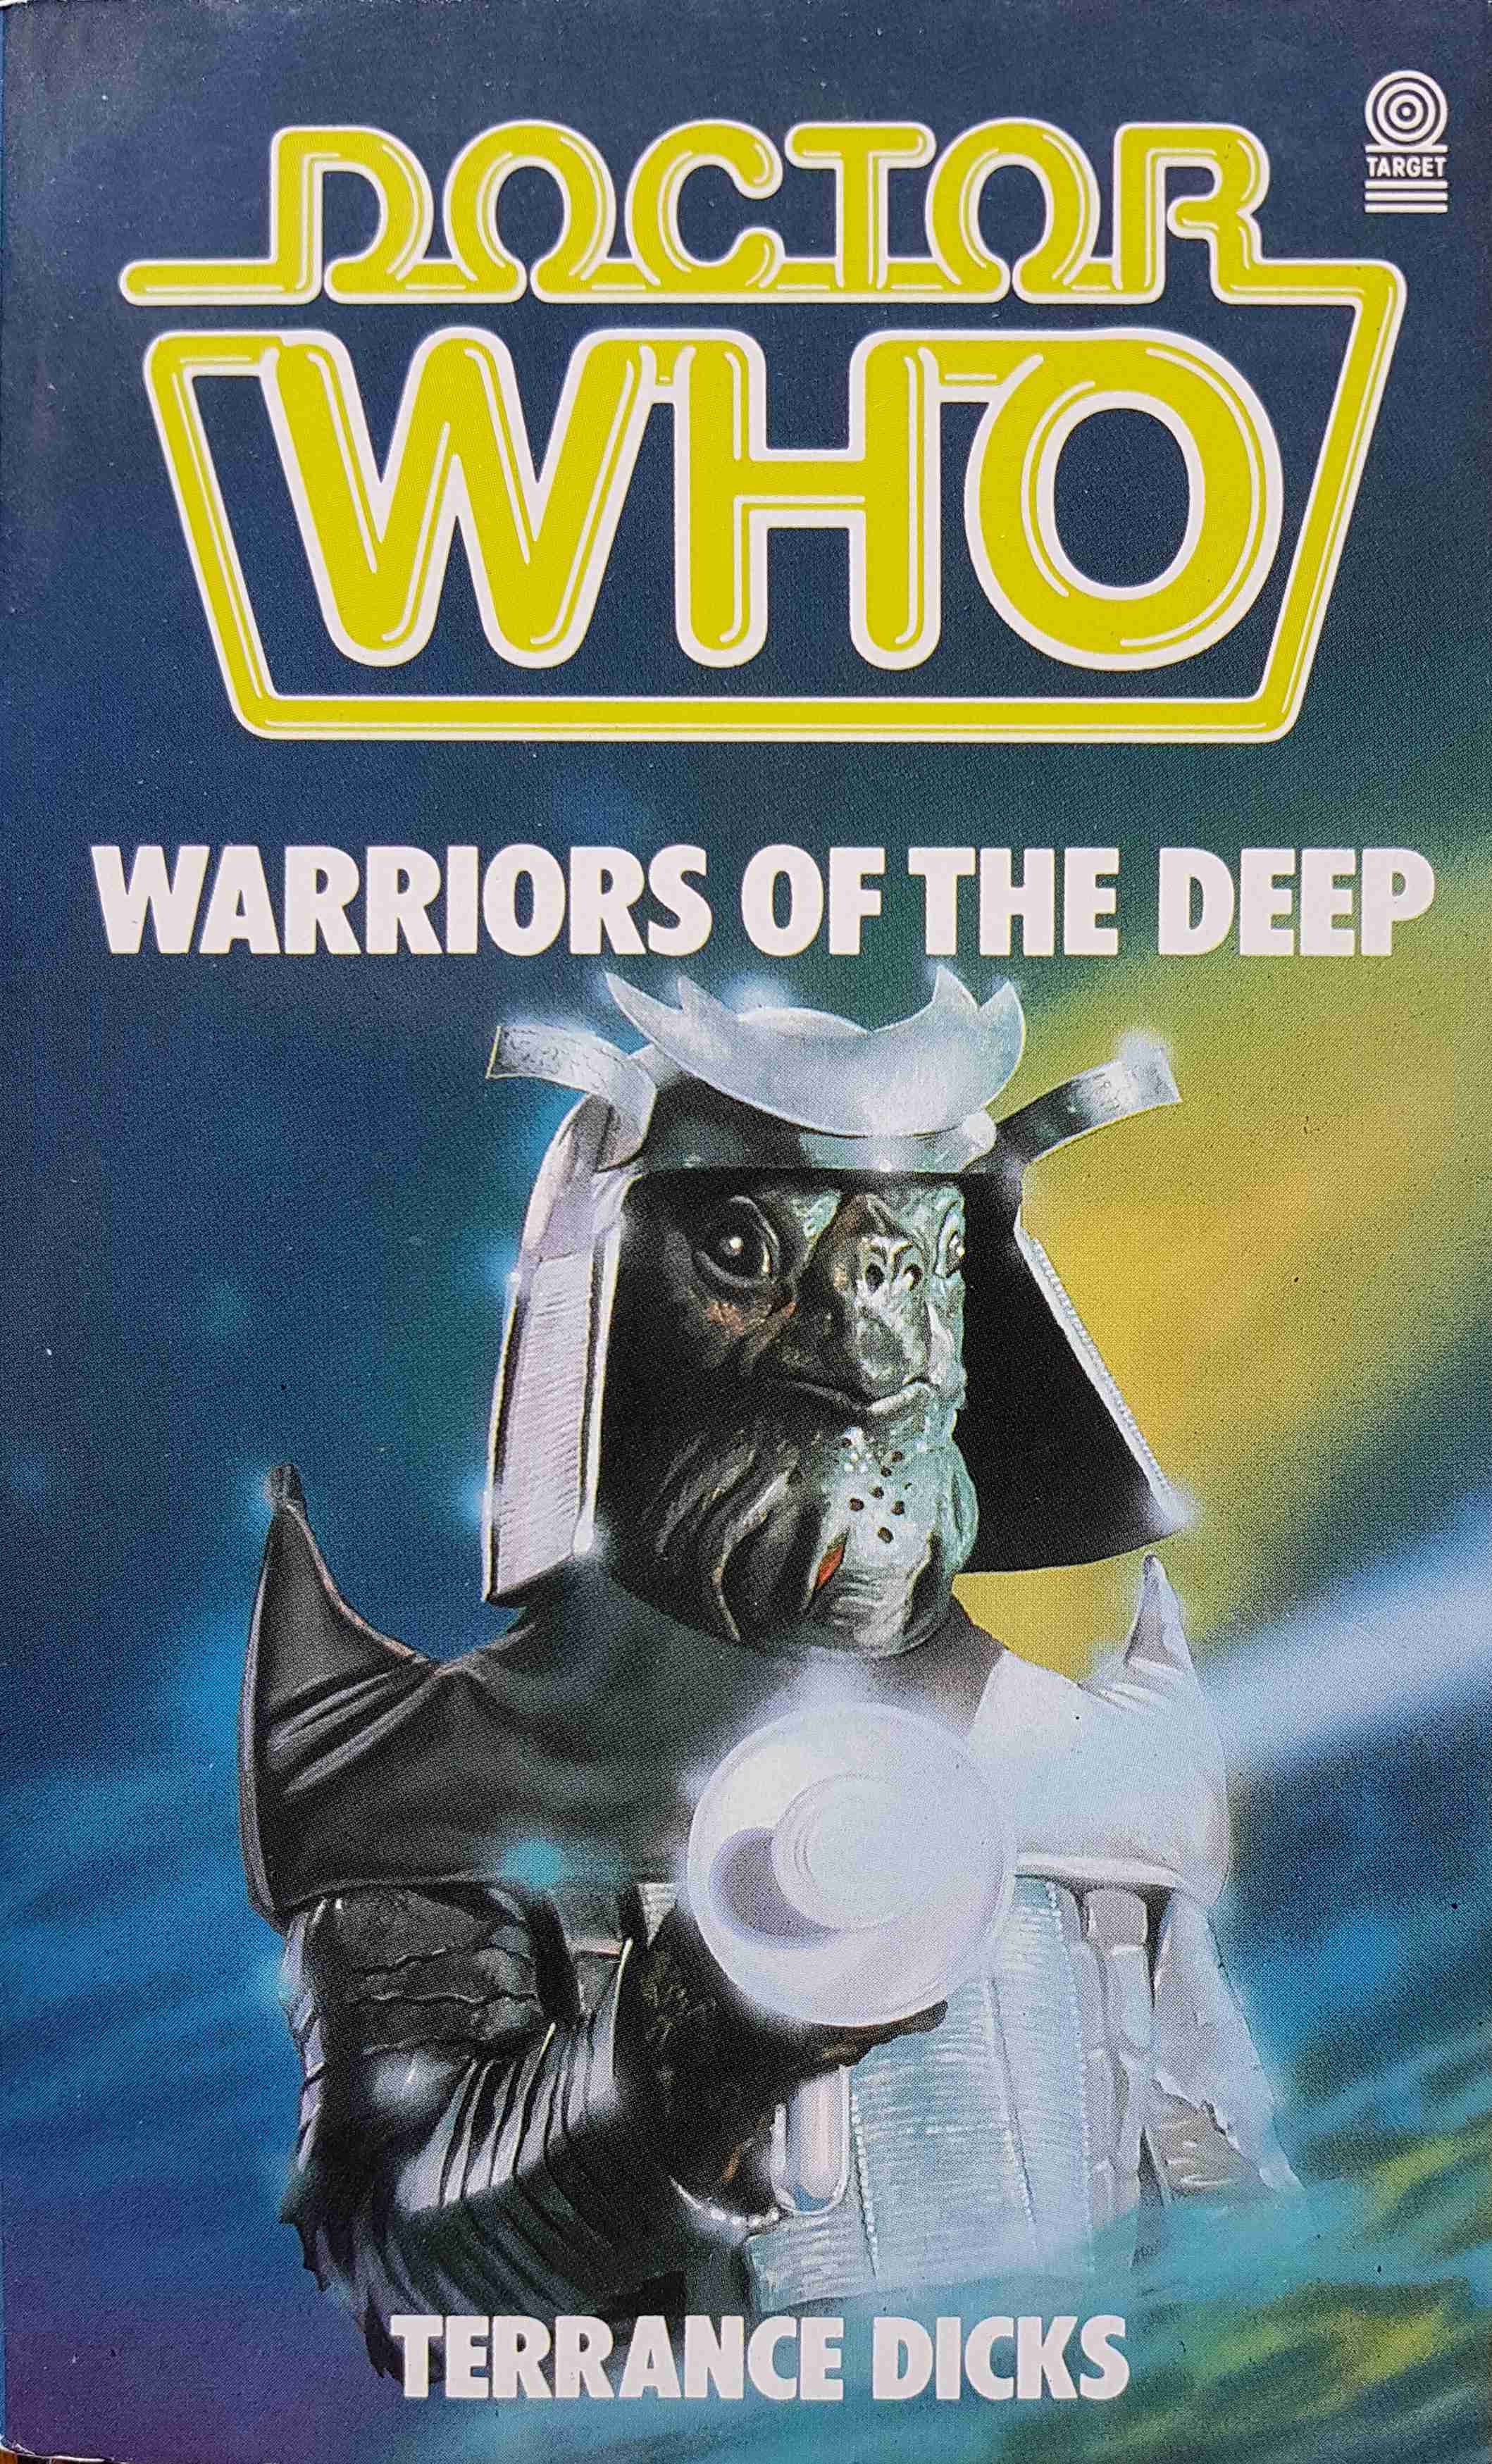 Picture of 0-426-19561-2 Doctor Who - Warriors of the deep by artist Terrance Dicks from the BBC records and Tapes library